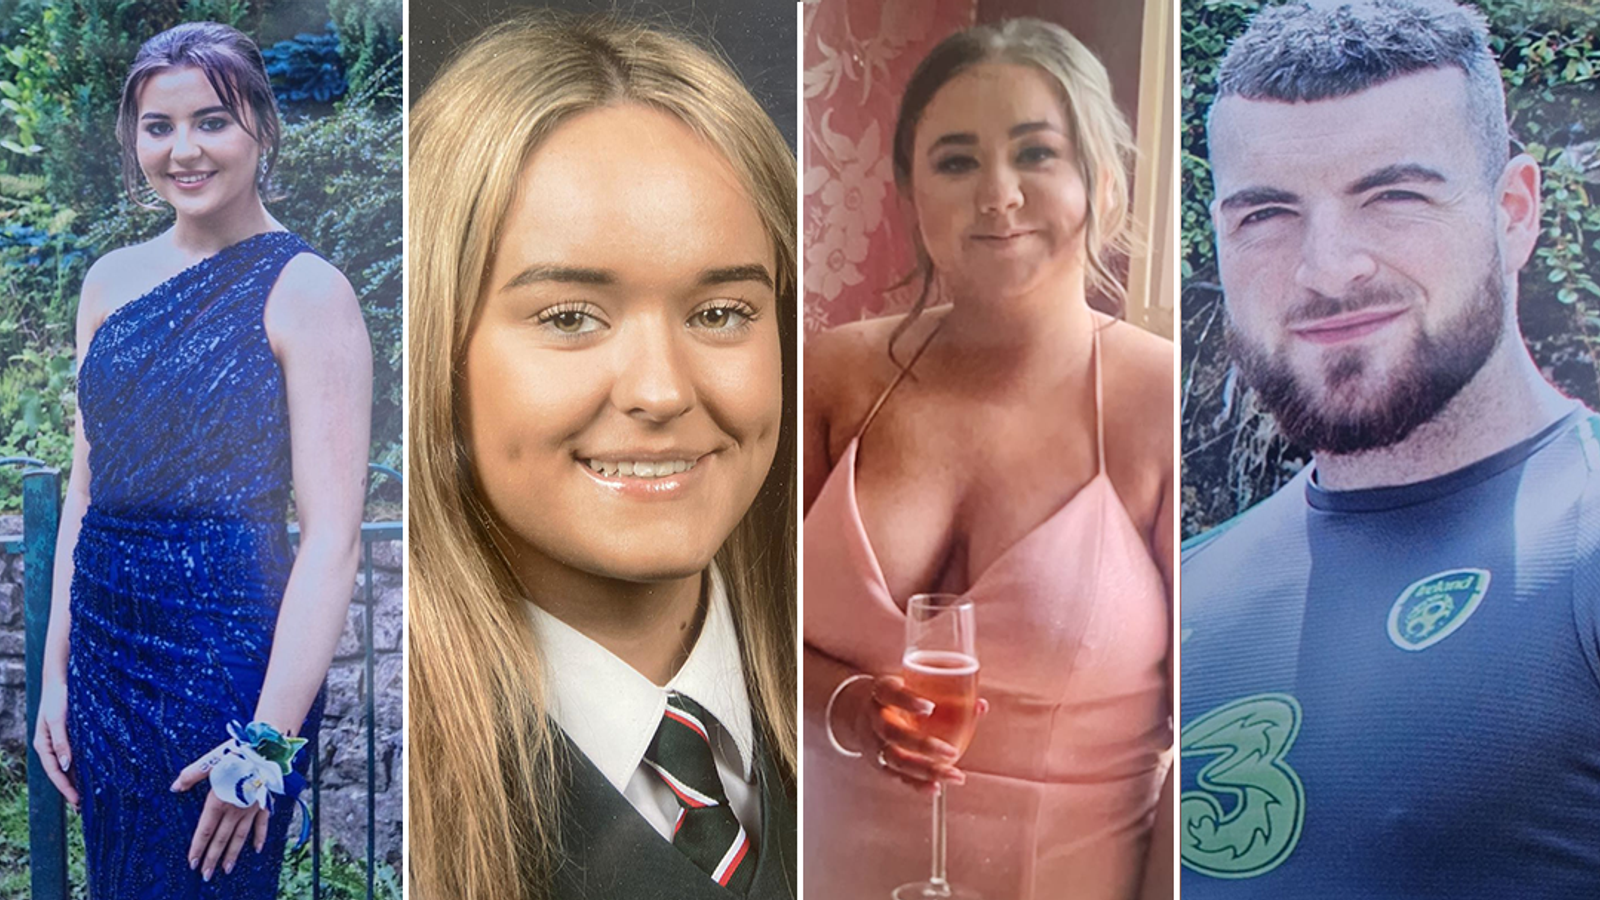 Ireland crash: Four young people killed in Co Tipperary are named by police